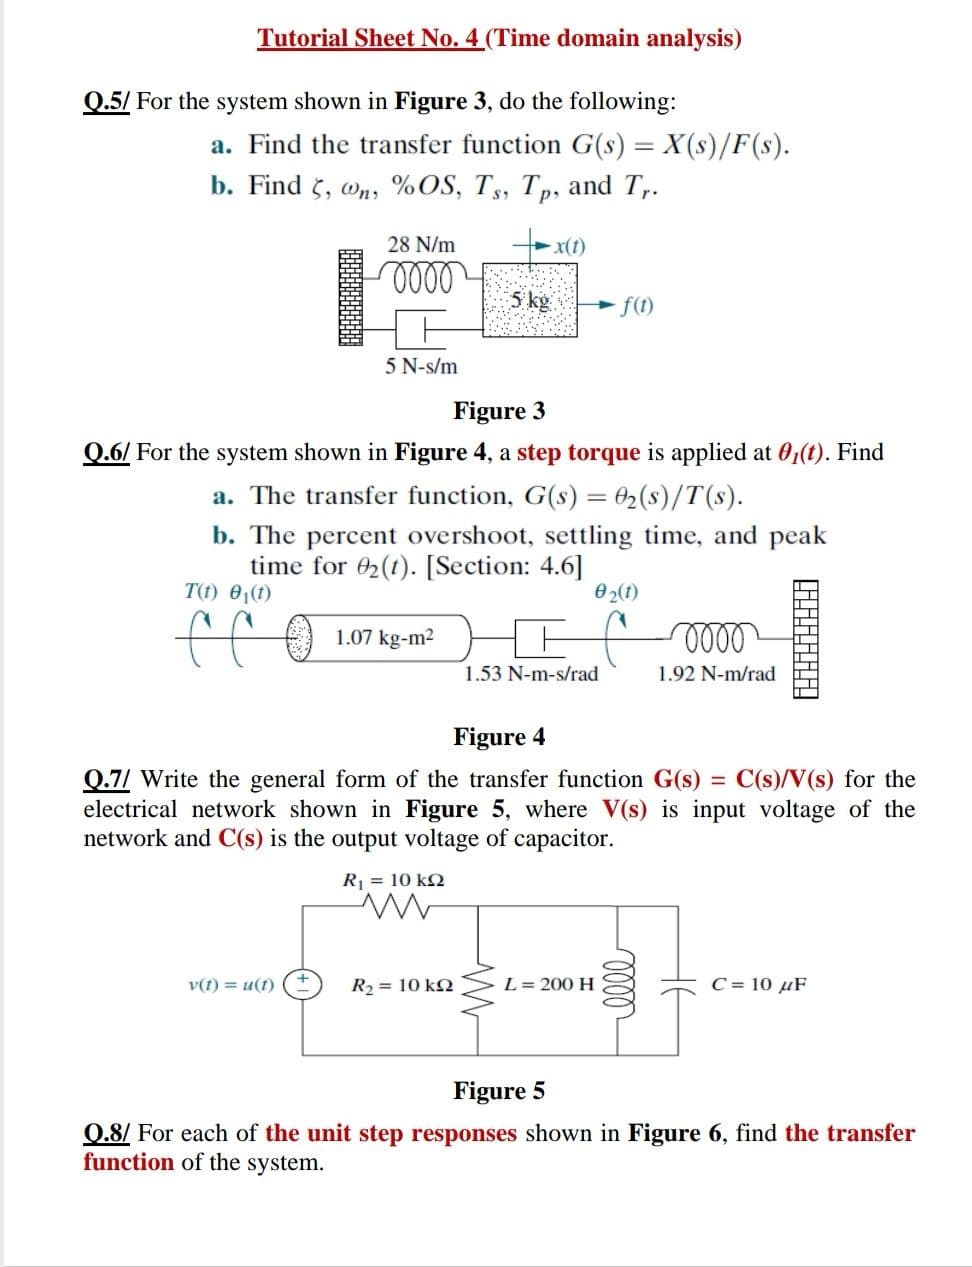 Tutorial Sheet No. 4 (Time domain analysis)
Q.5/ For the system shown in Figure 3, do the following:
a. Find the transfer function G(s) = X(s)/F(s).
b. Find 5, wn, %OS, Ts, Tp, and T,.
28 N/m
x(t)
5 kg
f(1)
5 N-s/m
Figure 3
0.6/ For the system shown in Figure 4, a step torque is applied at 0,(t). Find
a. The transfer function, G(s) = 02(s)/T(s).
b. The percent overshoot, settling time, and peak
time for 02(1). [Section: 4.6]
T(t) 0,(1)
0 2(1)
ff
1.07 kg-m2
1.53 N-m-s/rad
1.92 N-m/rad
Figure 4
C(s)/V(s) for the
0.7/ Write the general form of the transfer function G(s)
electrical network shown in Figure 5, where V(s) is input voltage of the
network and C(s) is the output voltage of capacitor.
%D
R = 10 k2
v(t) = u(t)
R2 = 10 kN
L= 200 H
C = 10 µF
Figure 5
0.8/ For each of the unit step responses shown in Figure 6, find the transfer
function of the system.
